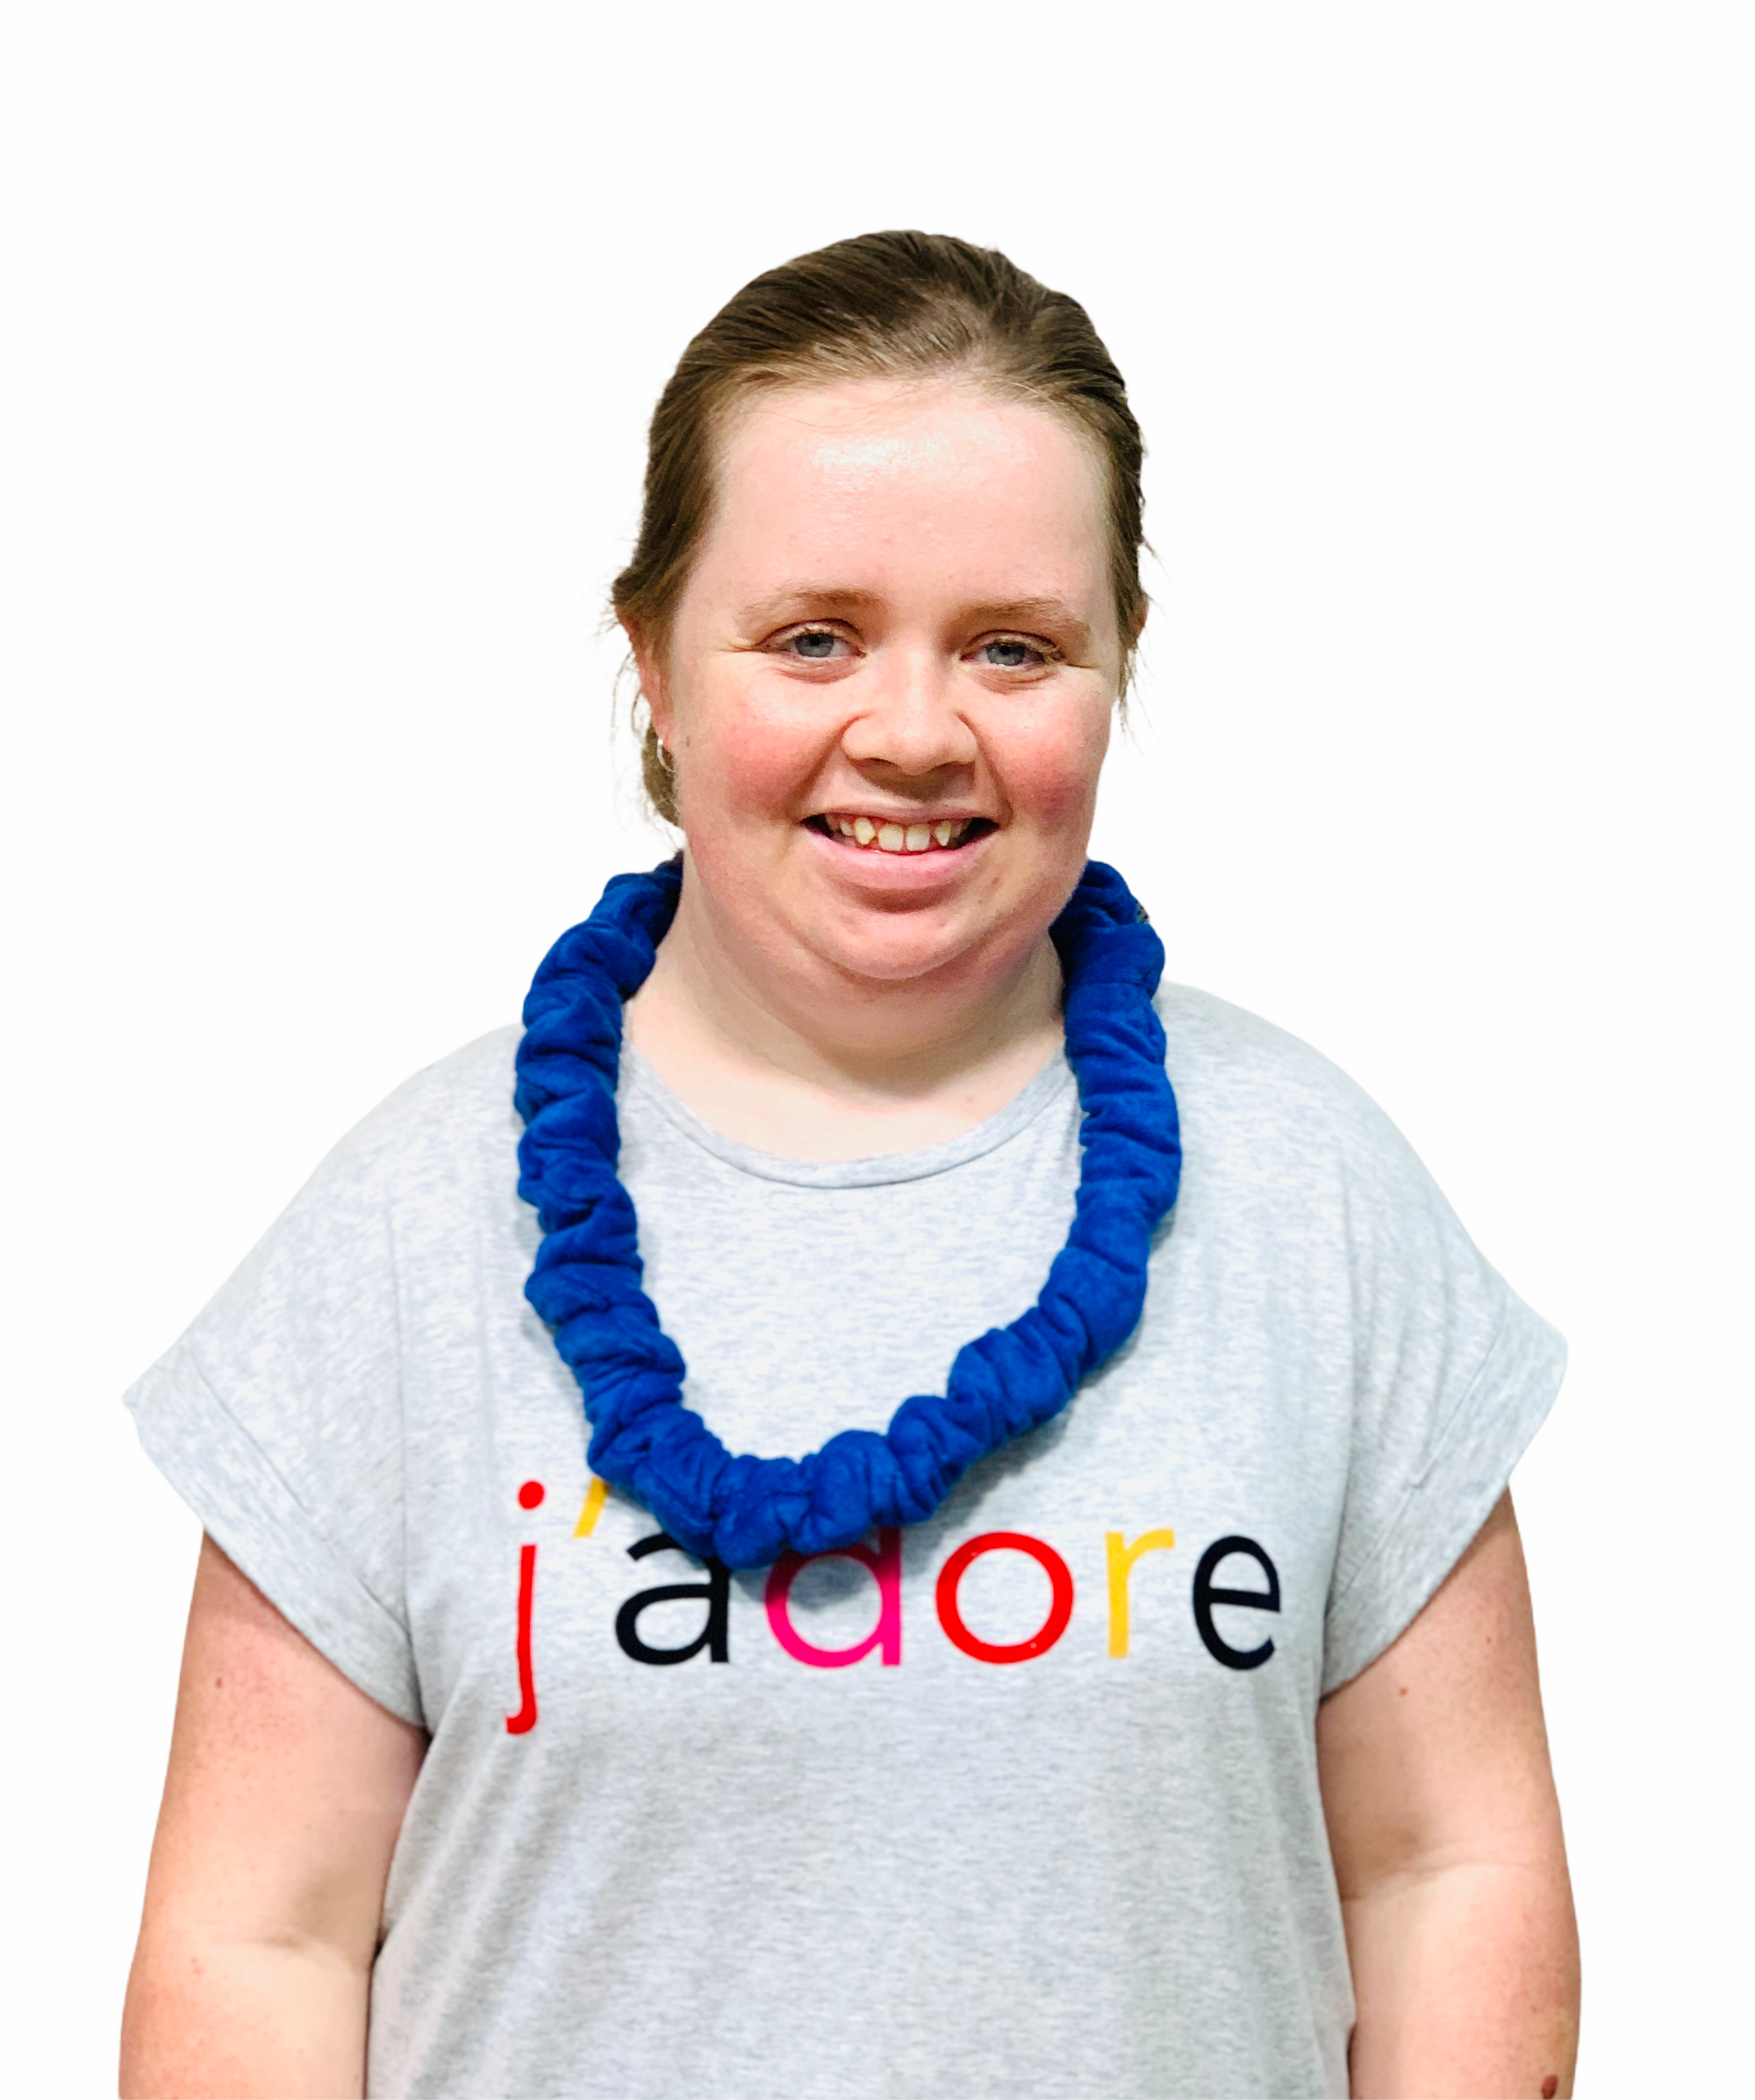 Girl wearing grey t-shirt smiling with blue Fabric Chew Bite Band - Tough around her neck